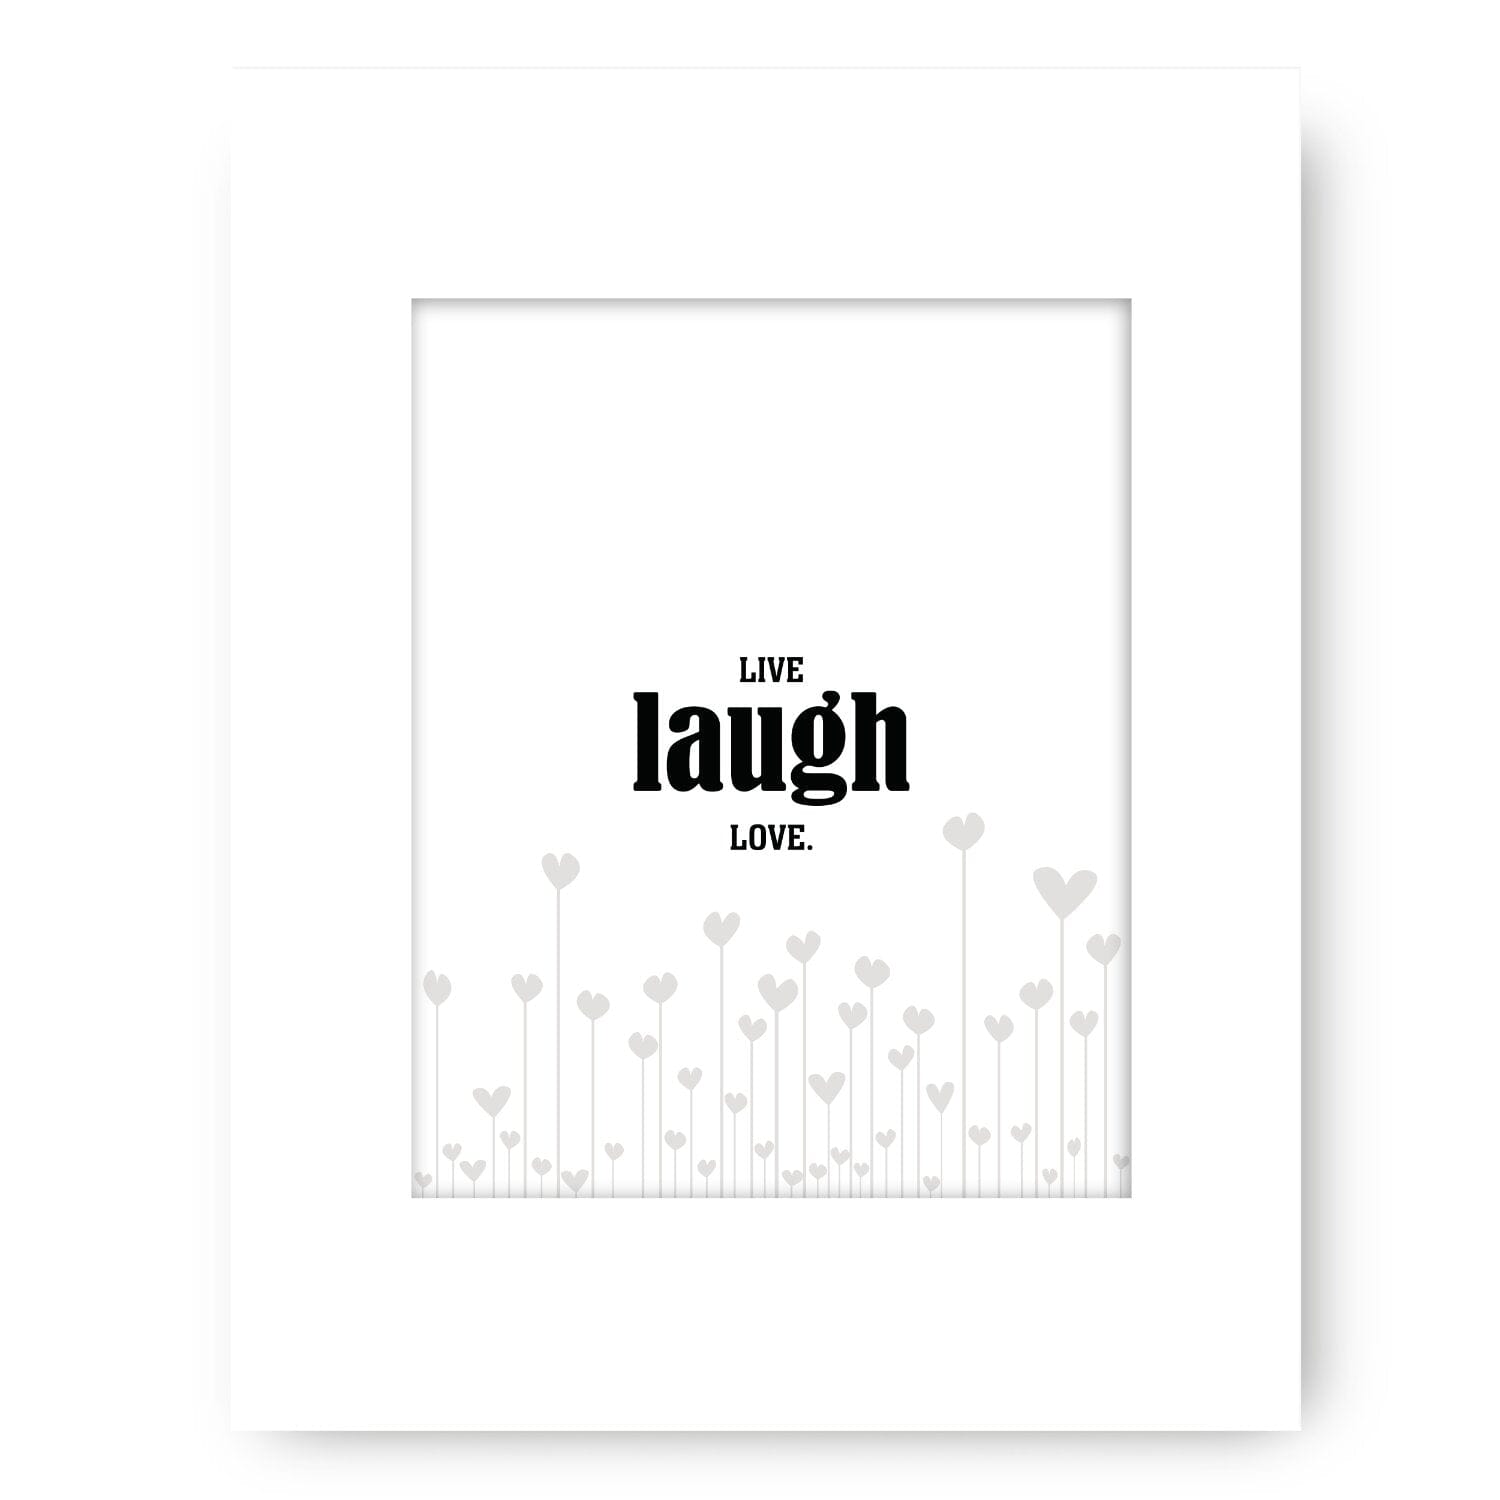 Light-Hearted Wall Art - Live Laugh Love - Wise and Witty Wise and Wiseass Quotes Song Lyrics Art 8x10 White Matted Print 